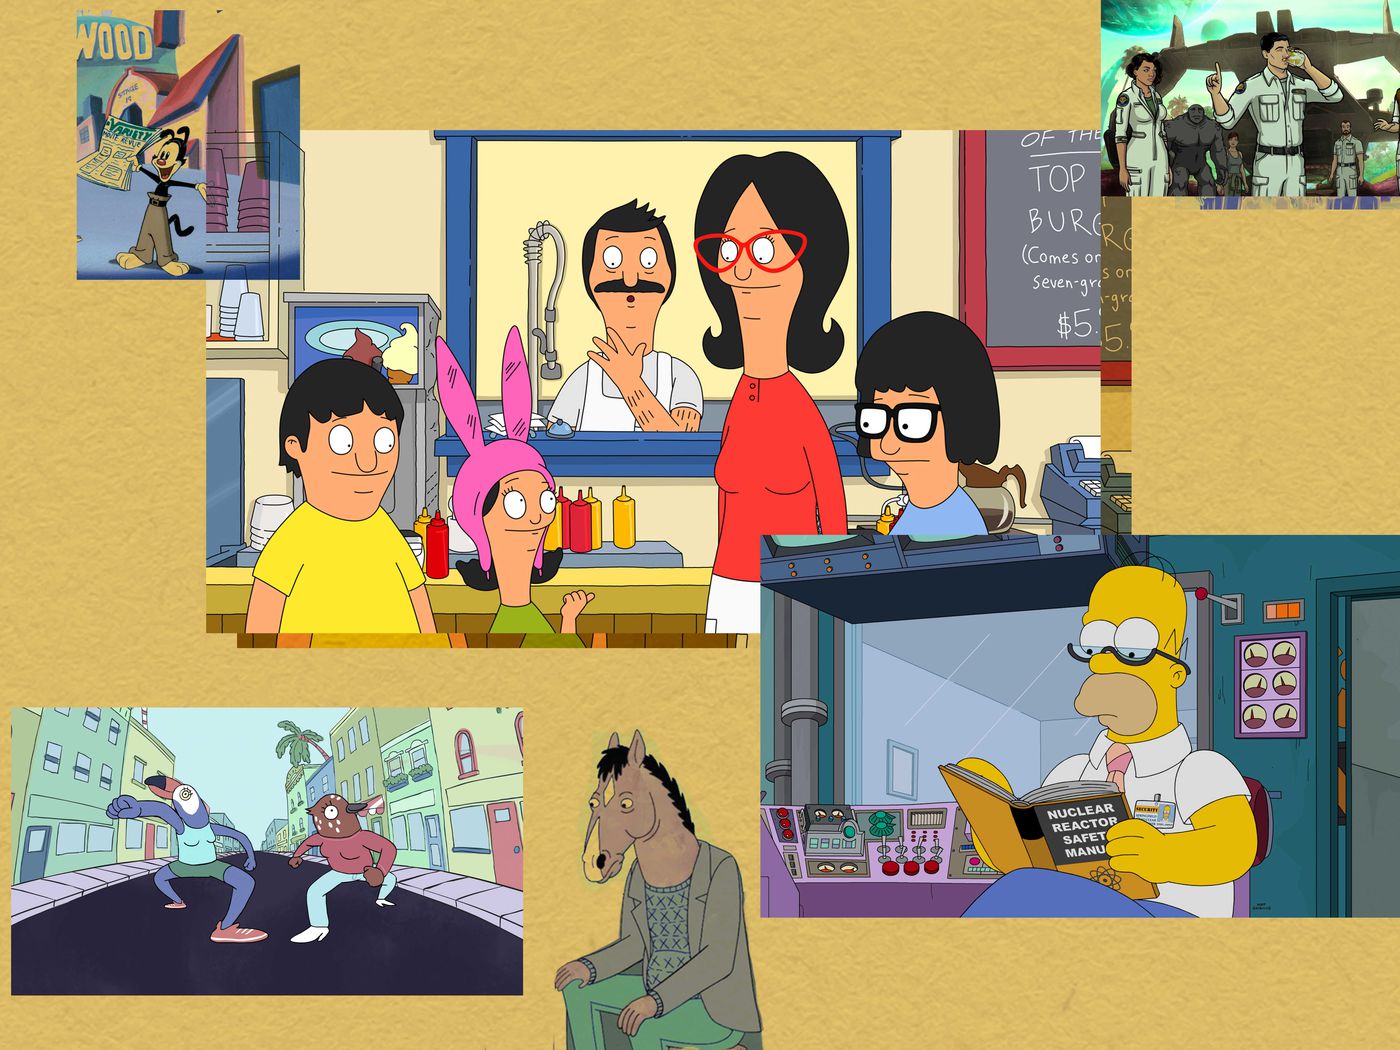 25 cartoons to stream and get obsessed with: Simpsons, Bob's Burgers, and  more - Vox